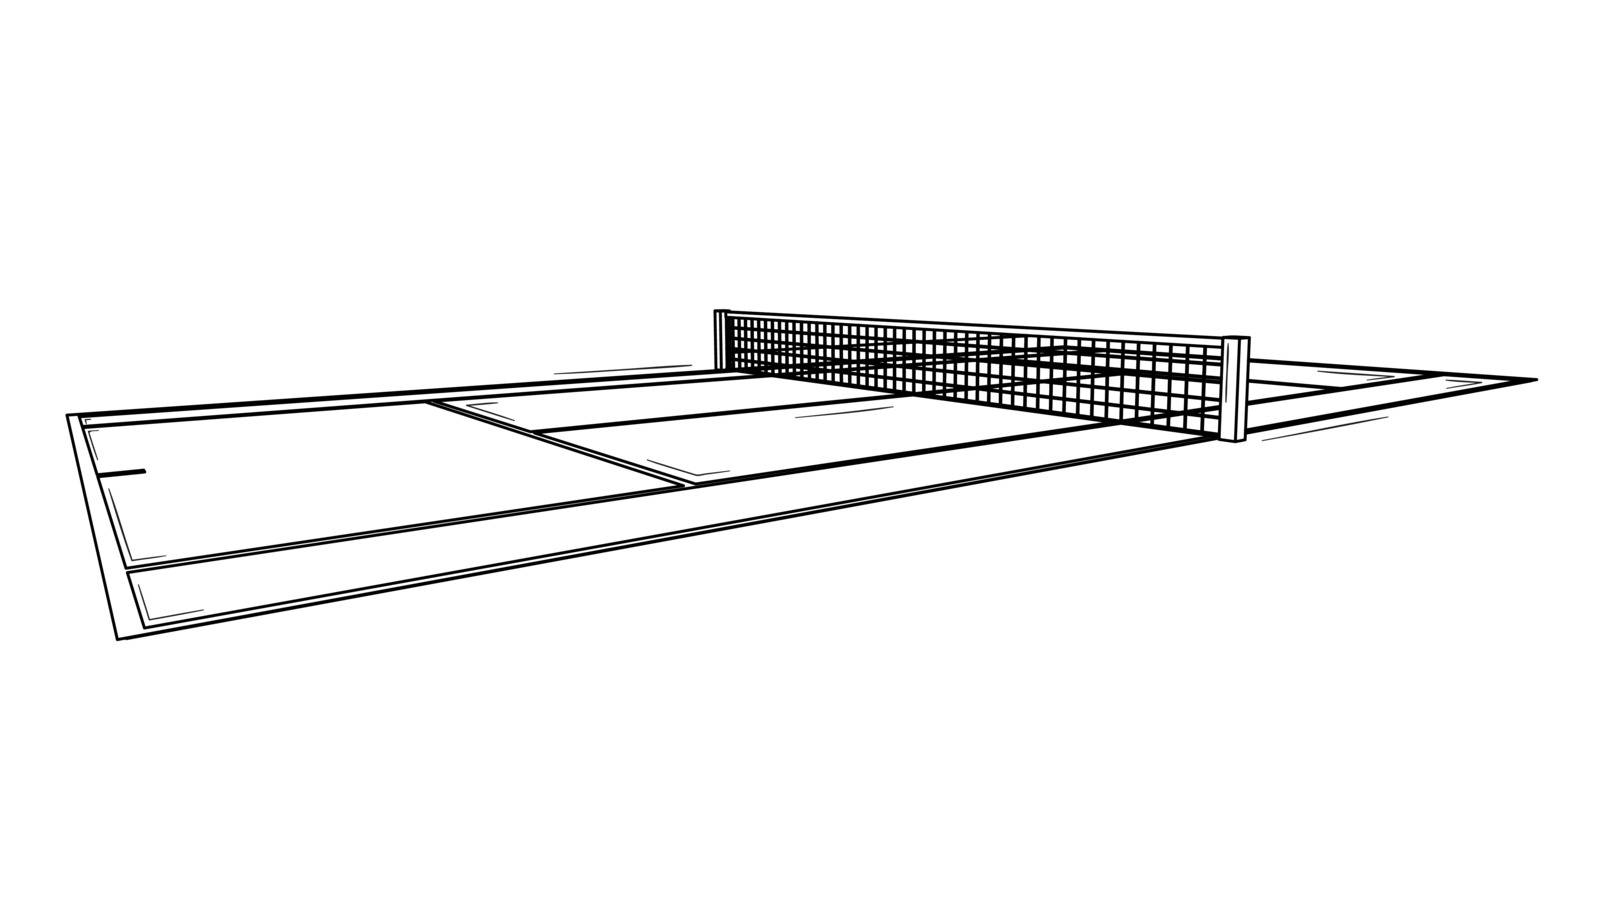 Empty tennis court ready to match. Black outline illustration on white background. Sketch.